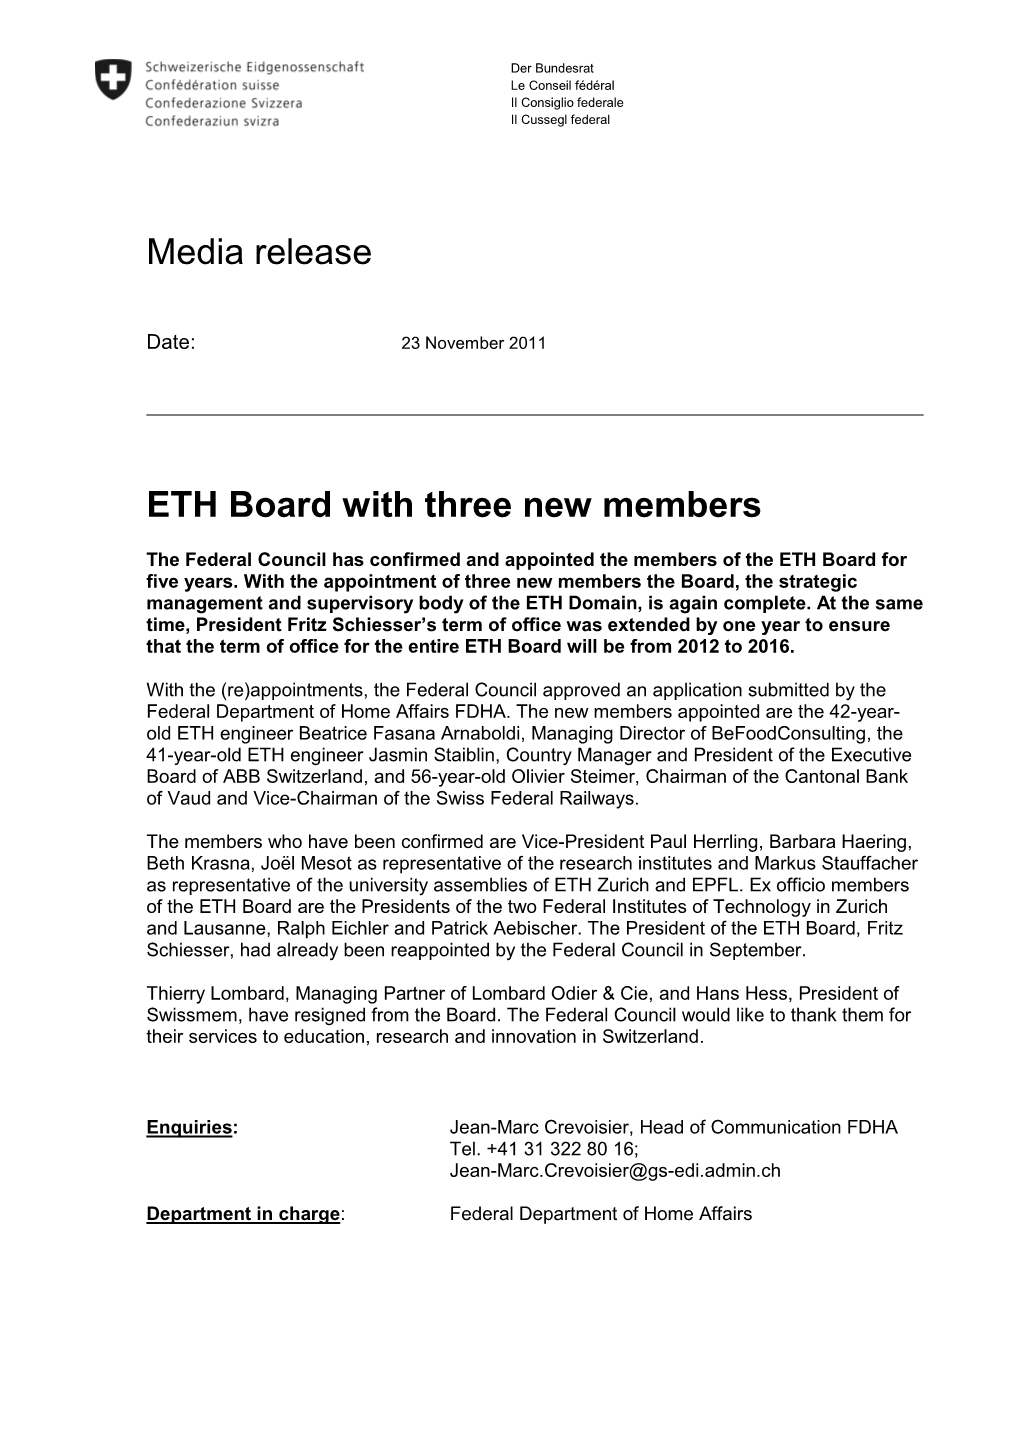 Media Release ETH Board with Three New Members